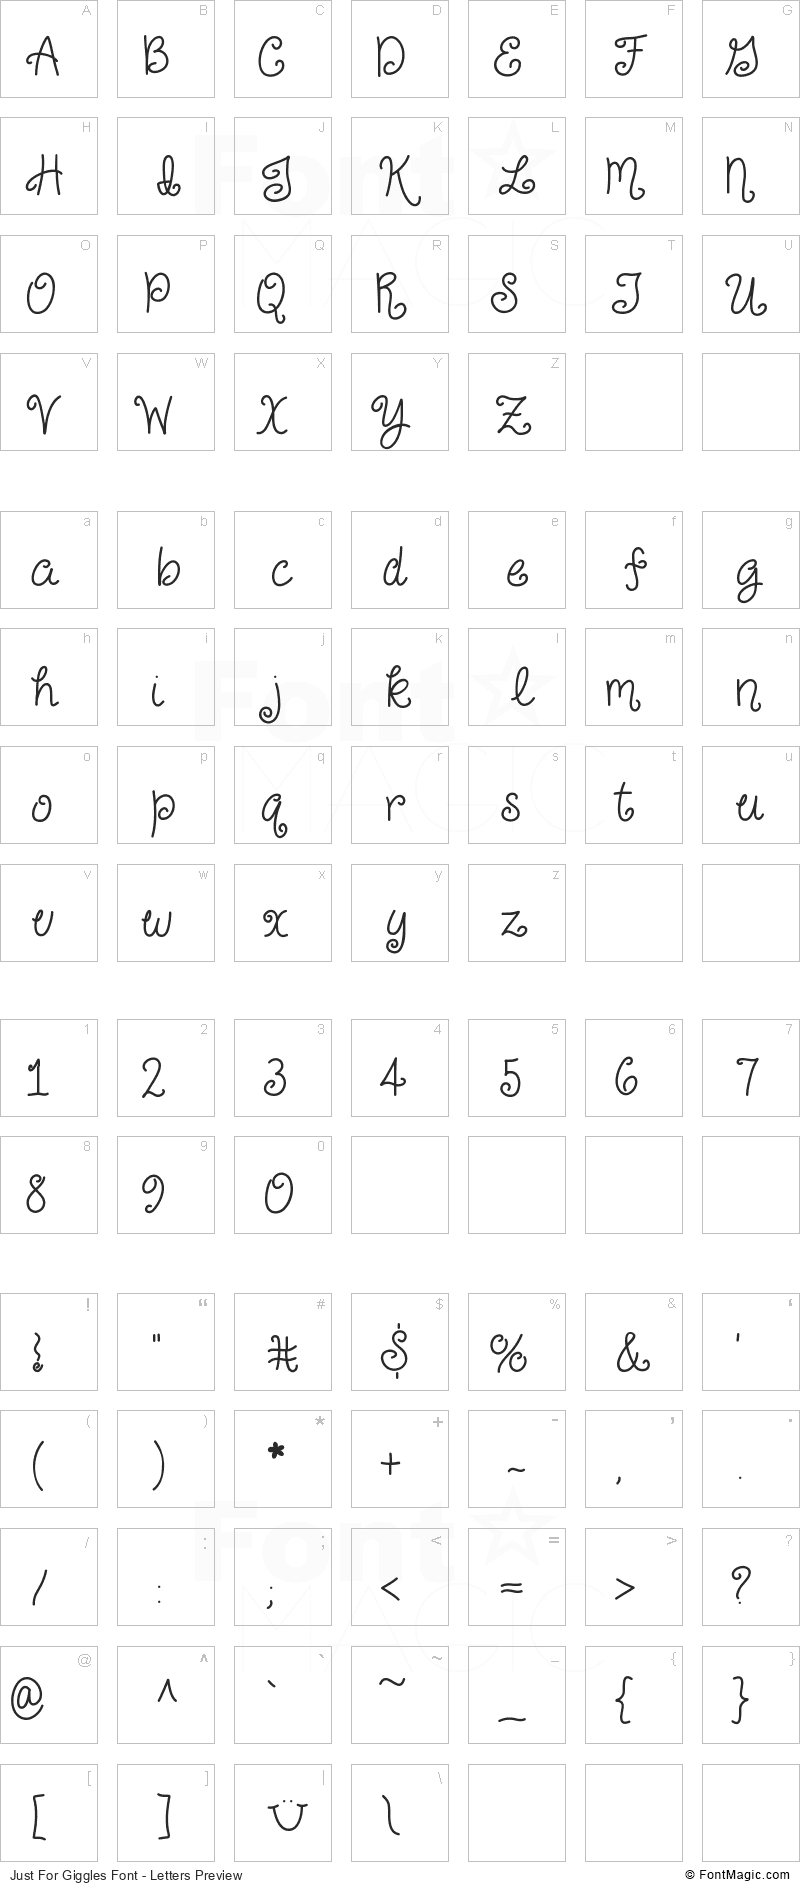 Just For Giggles Font - All Latters Preview Chart